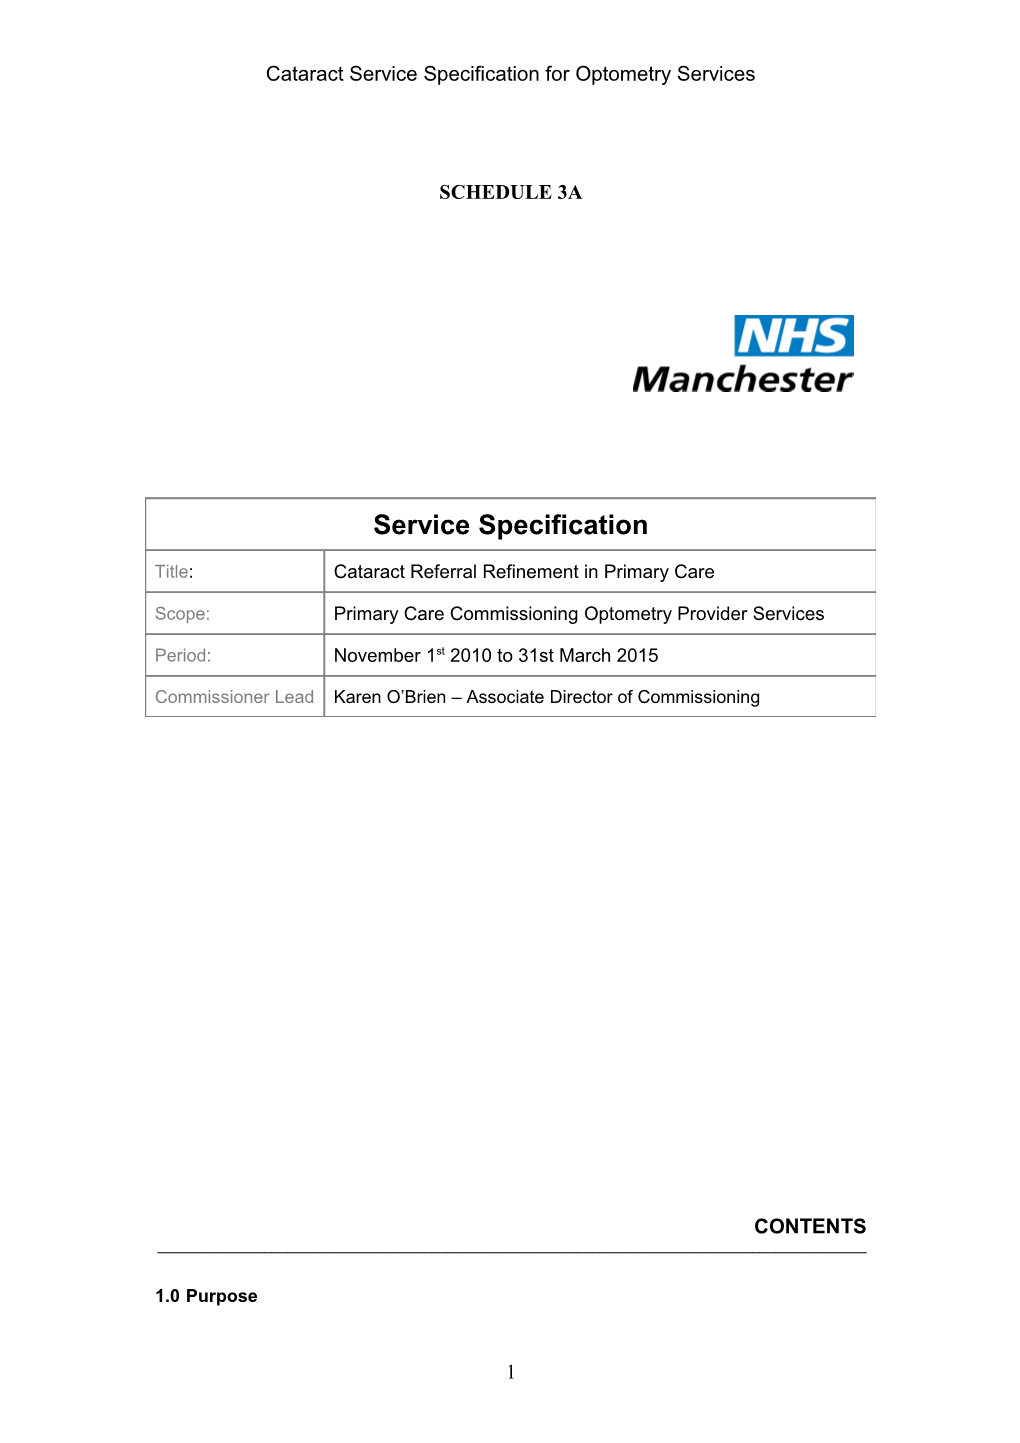 Cataract Service Specification for Optometry Services